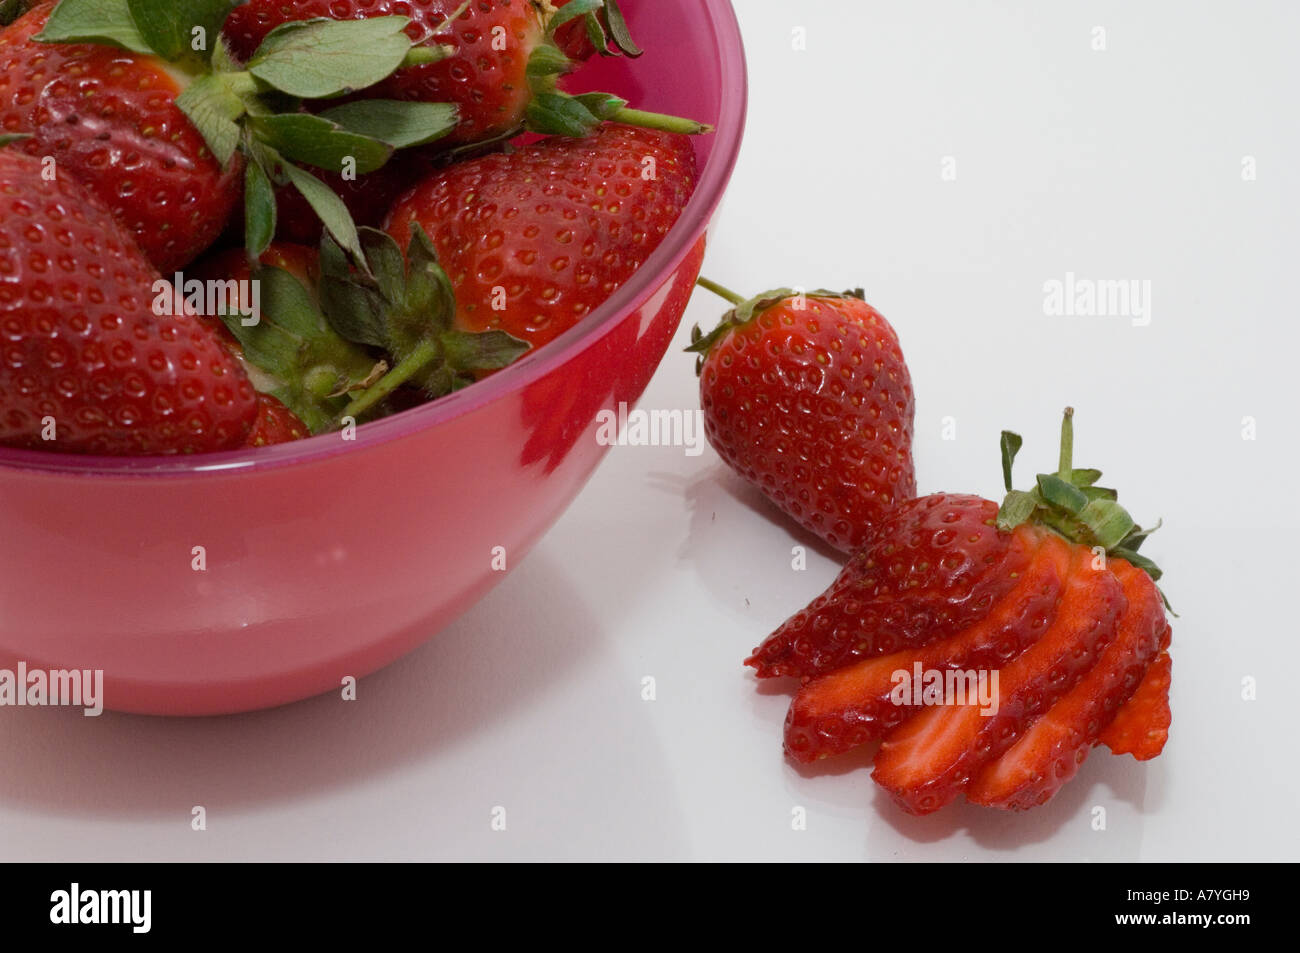 Strawberries in a pink glass bowl  on white background Stock Photo